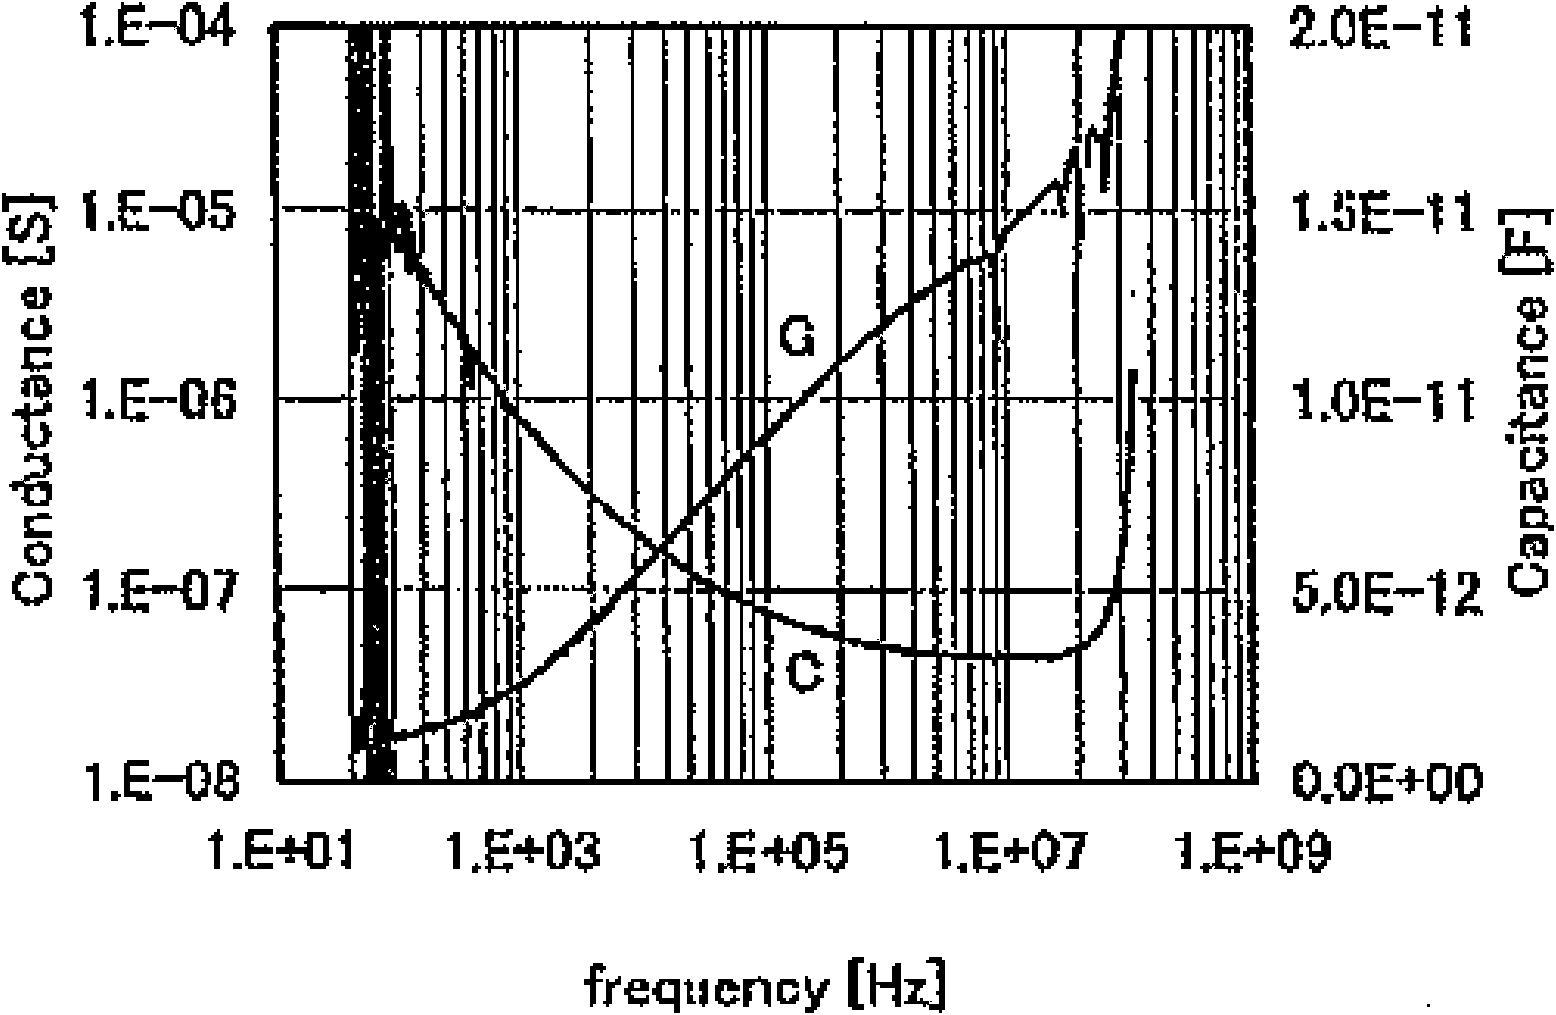 Pulse frequency intensifier for anion generating device